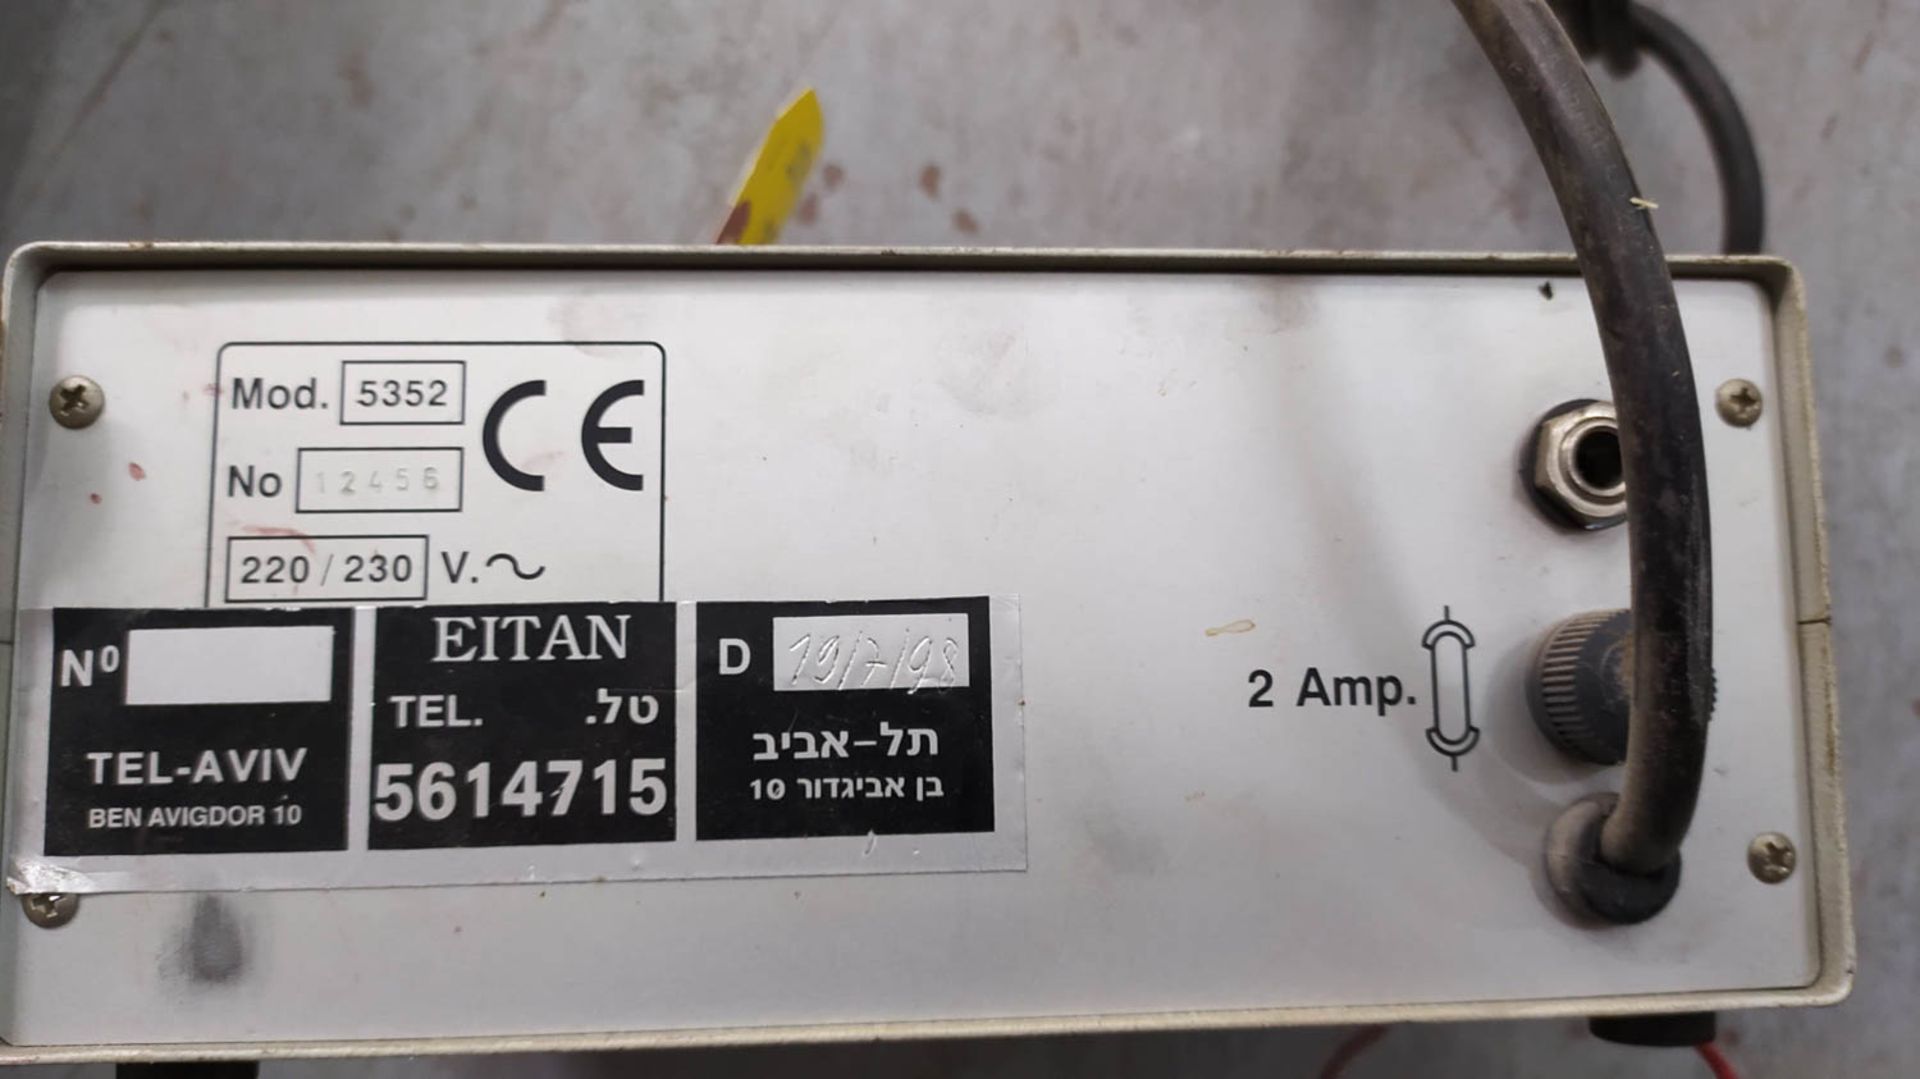 EITAN INDUSTRIES MDL. 5352 MICROMOTOR; 220-230V; 2 AMP, S/N: 12456 [A#368][LOCATED IN Holon] - Image 2 of 2